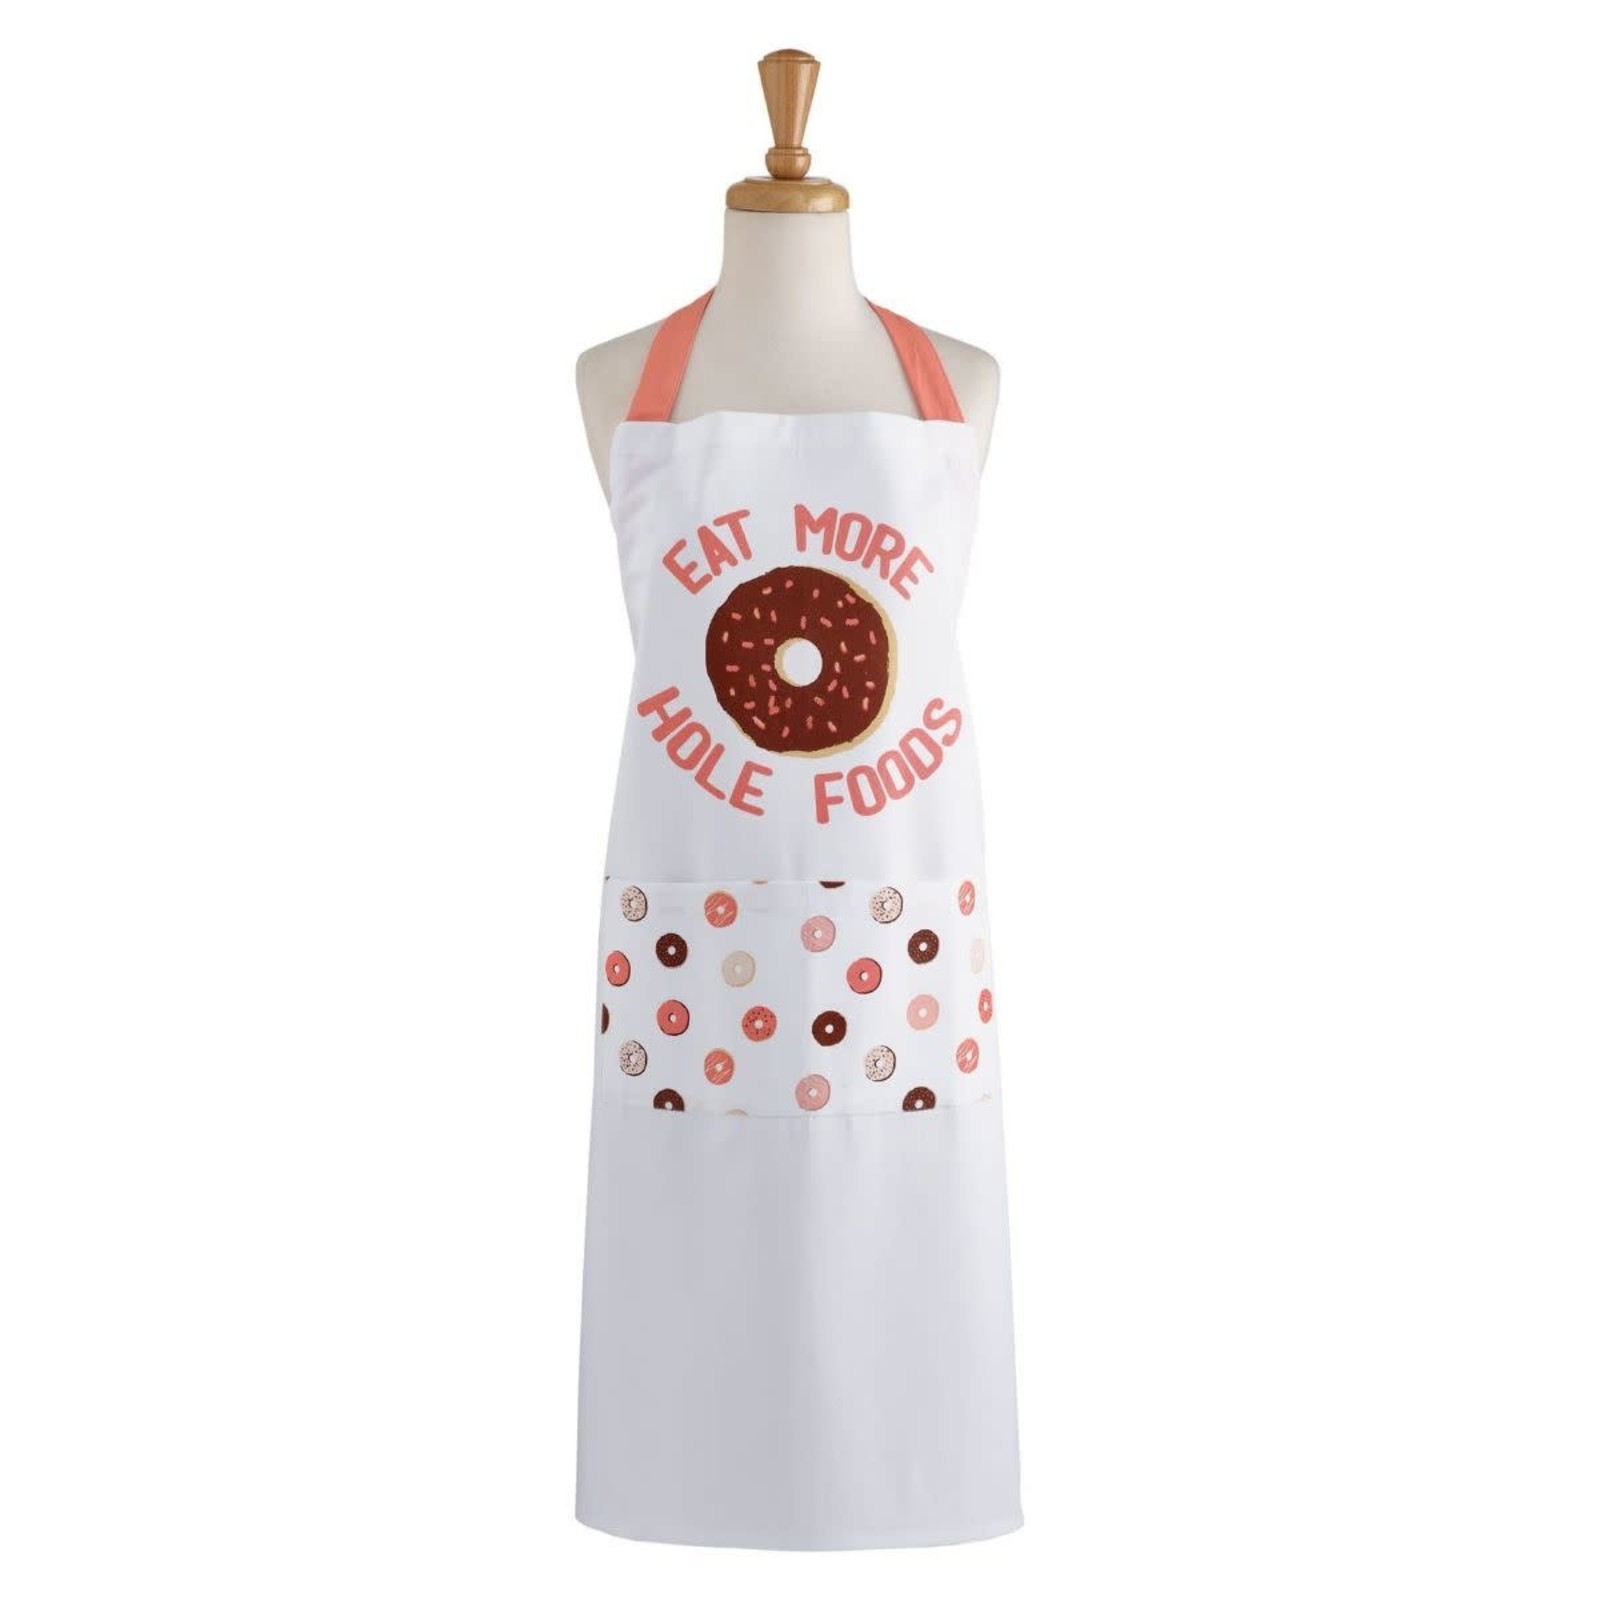 Design Imports DII Hole Foods Donuts Printed Apron  750529 loading=